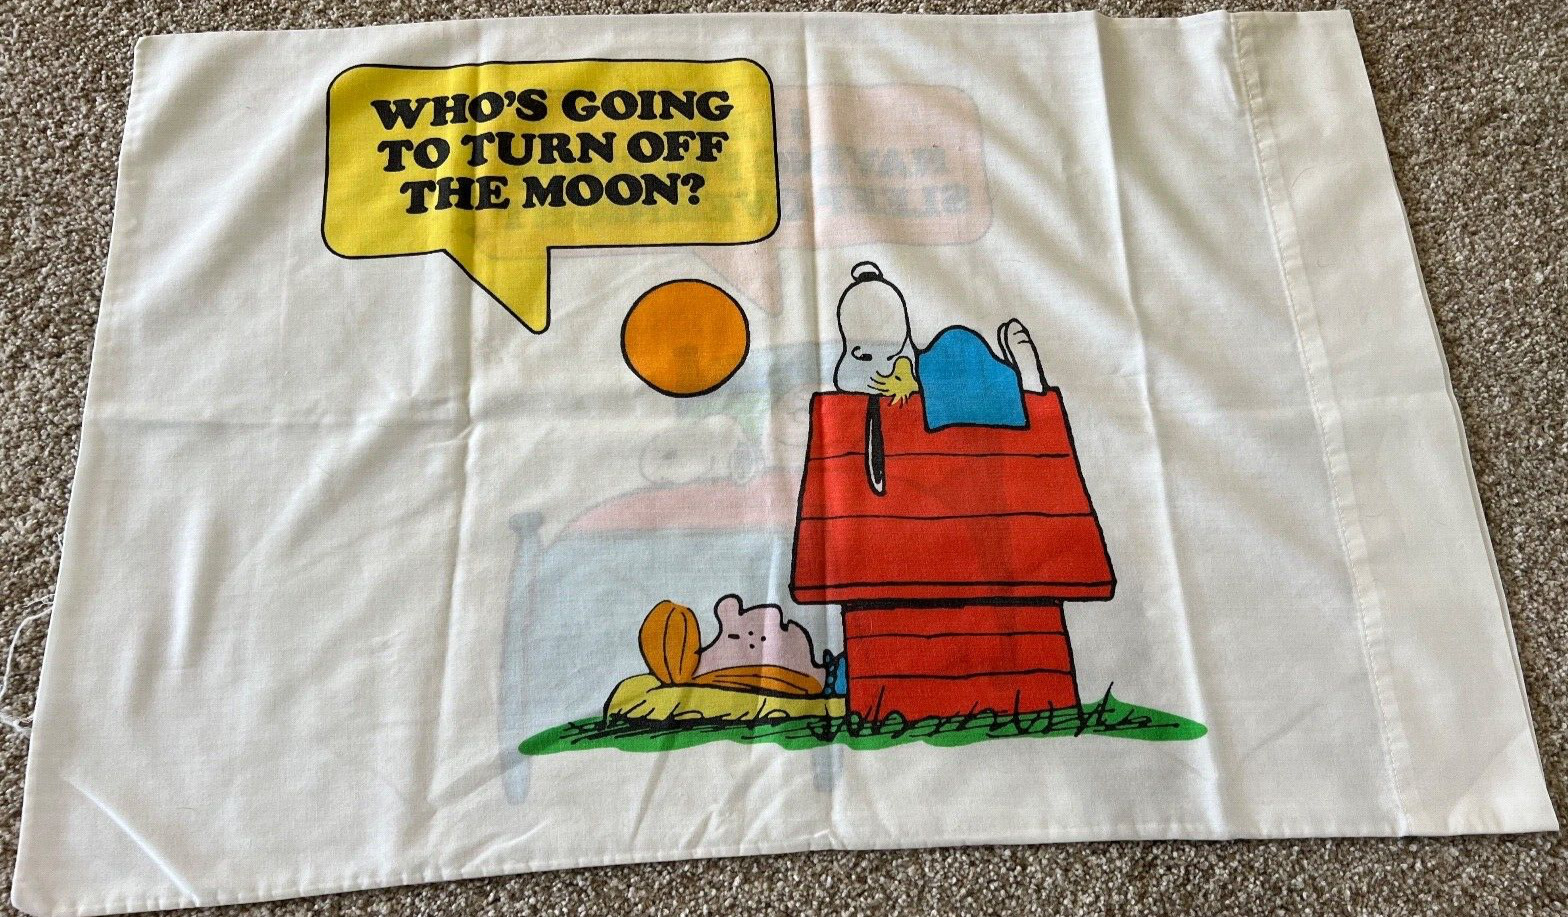 70s Vintage Charlie Brown Peanuts Snoopy 1971 Pillowcase Schulz Turn off Moon